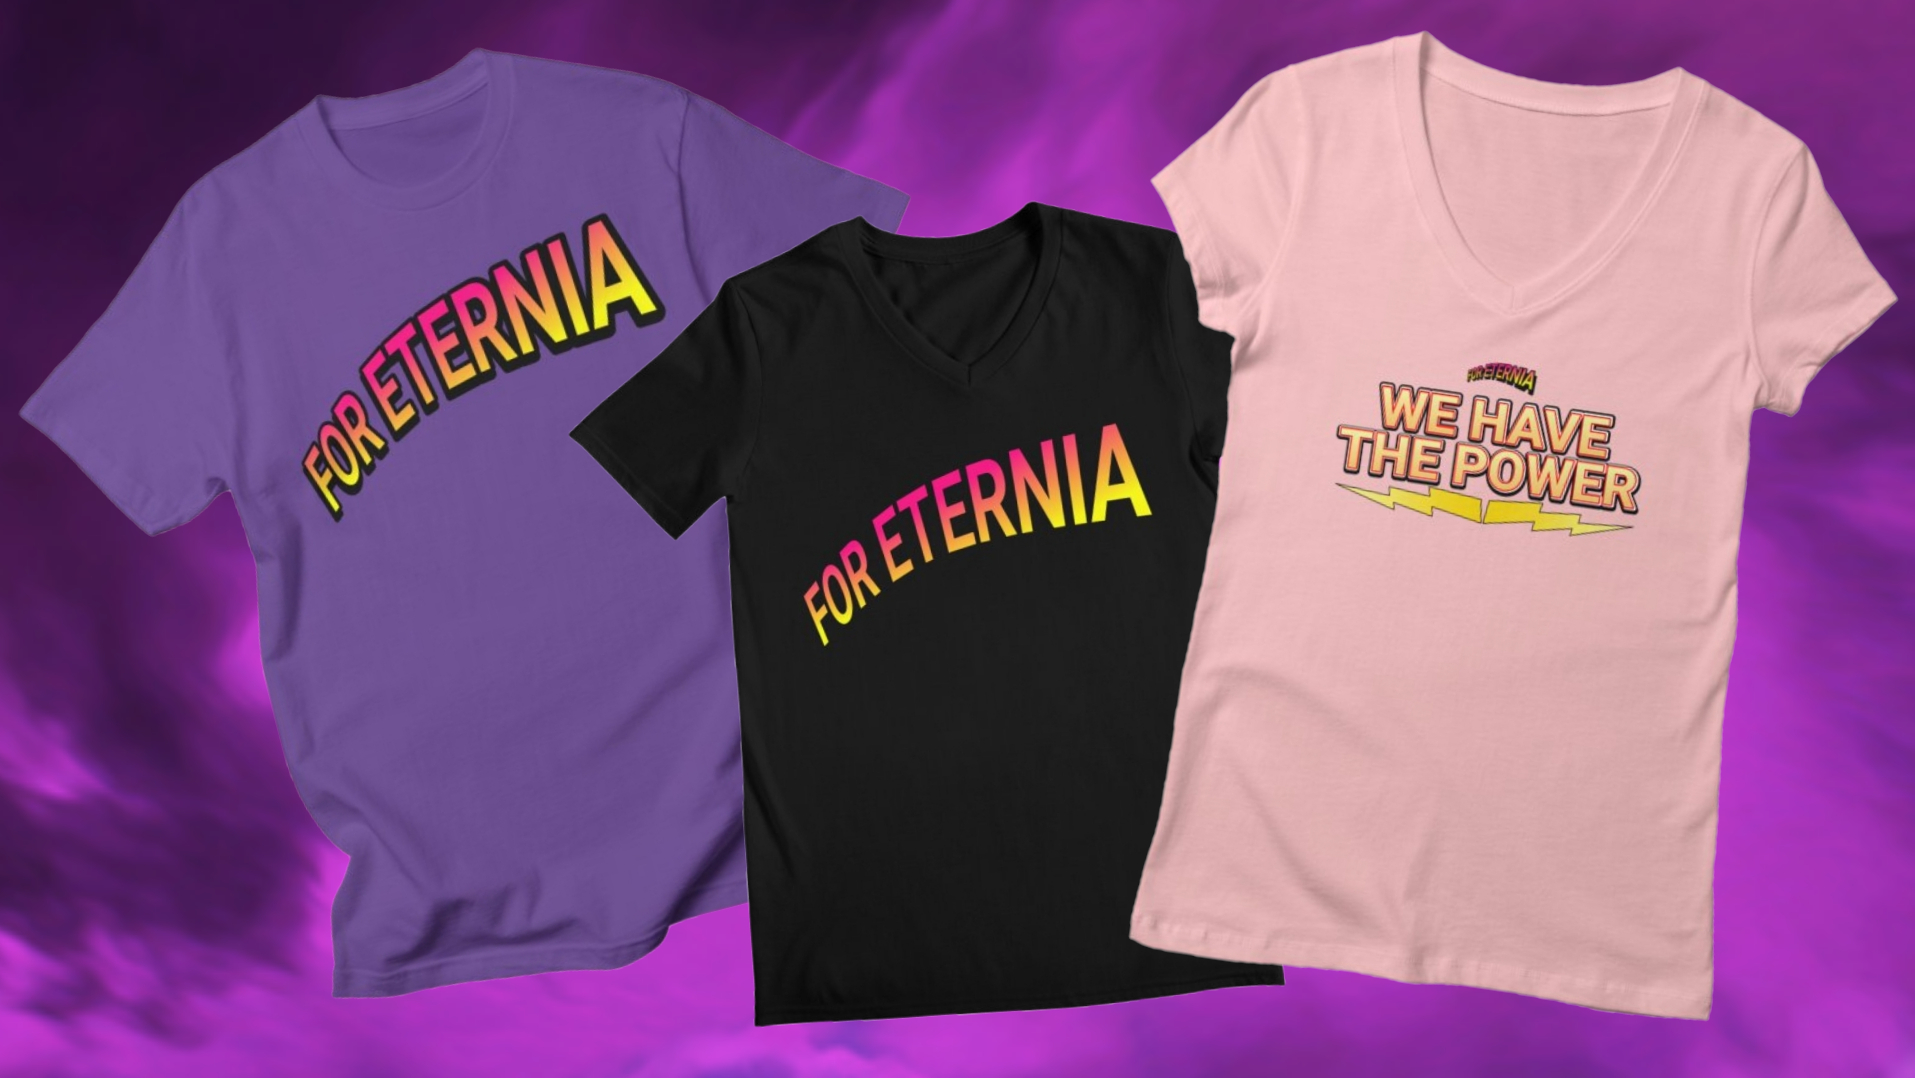 FOR ETERNIA Official Shirts are now available!